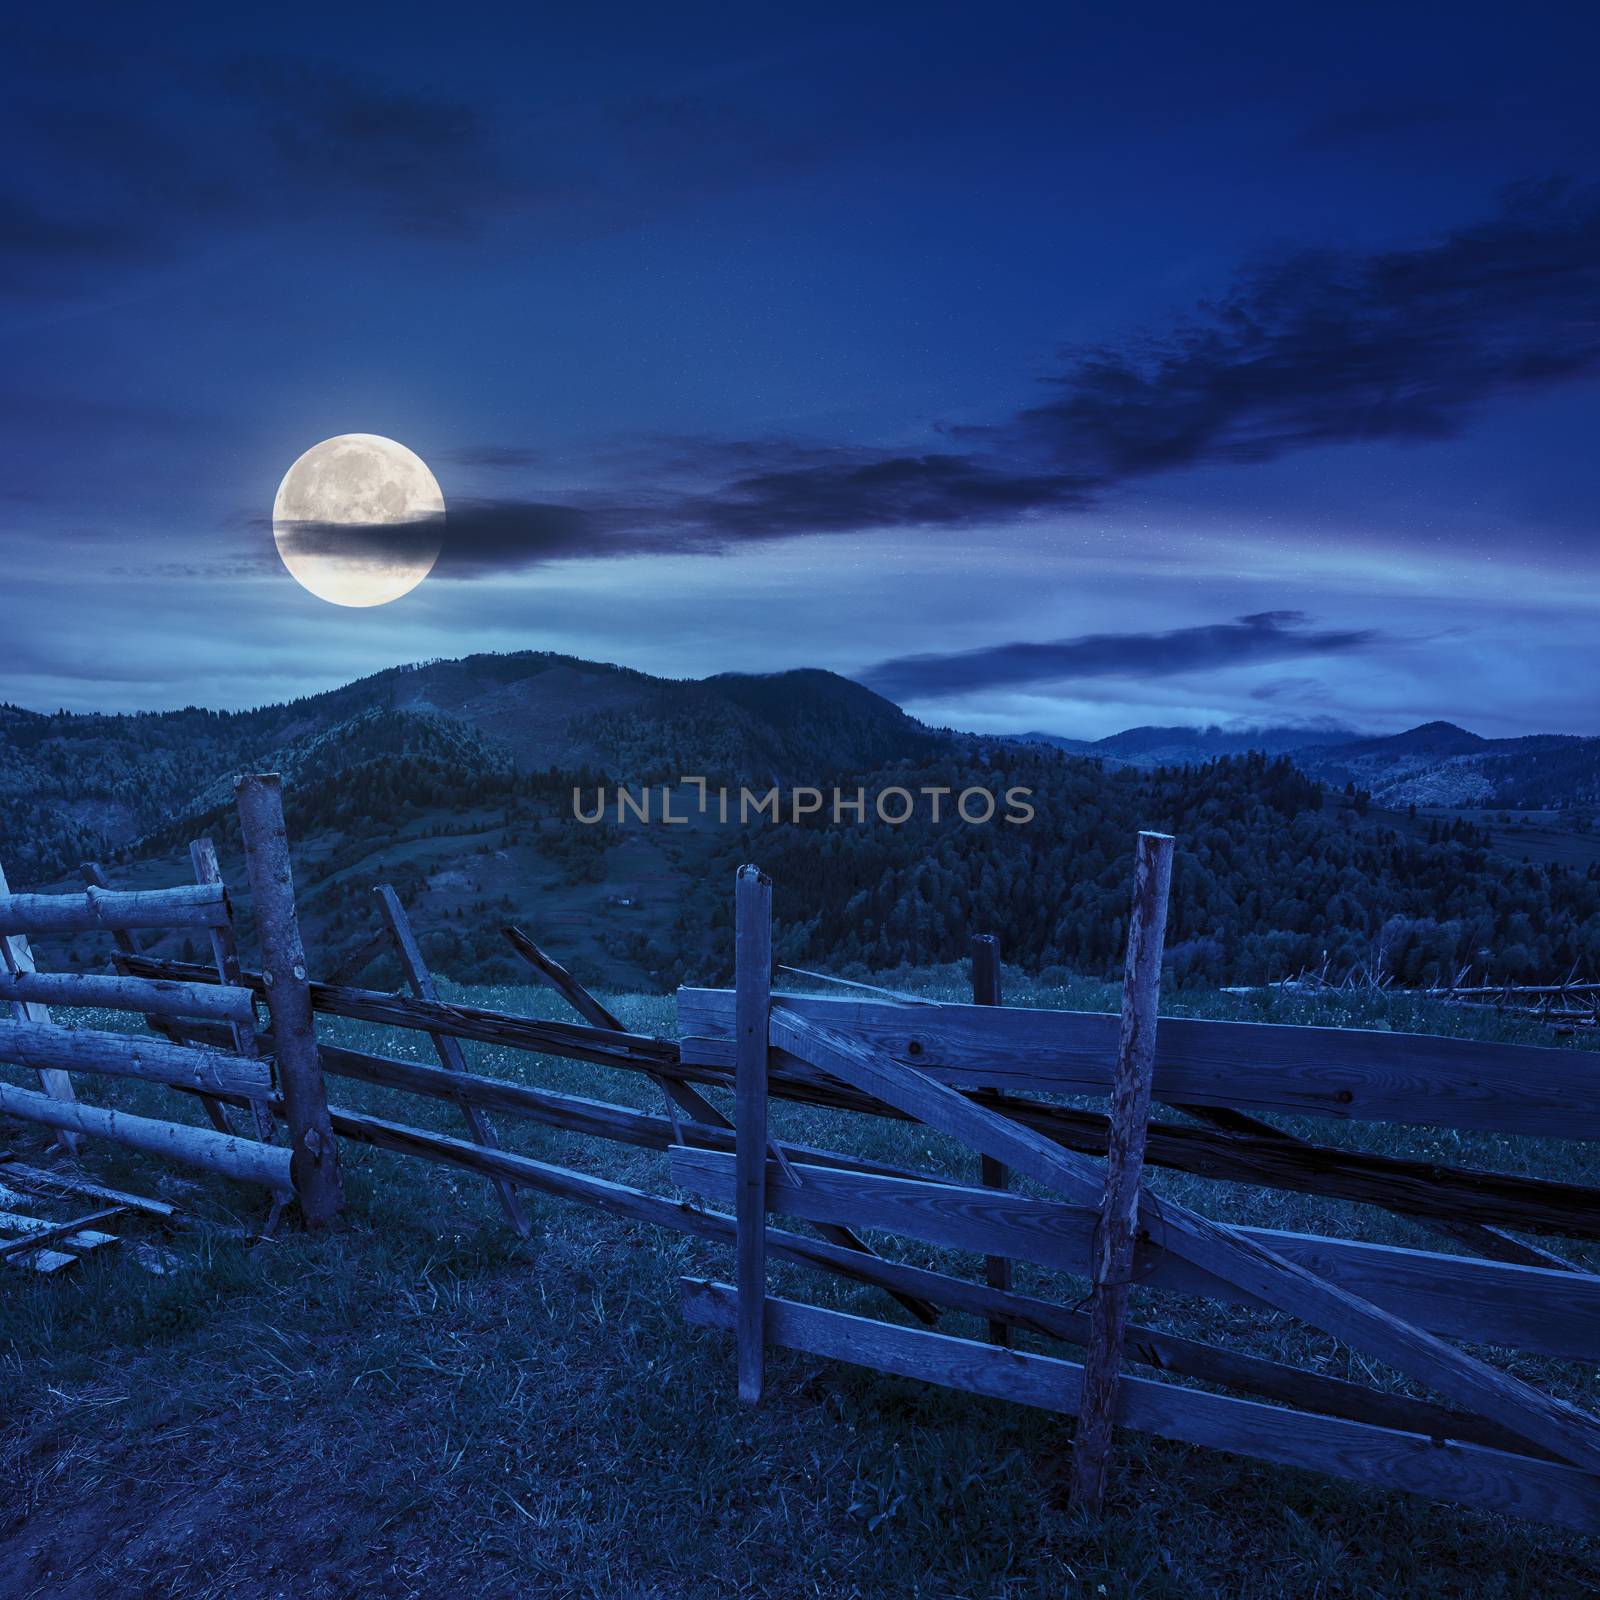 autumn landscape. fence near the meadow path on the hillside. forest in fog on the mountain. at night in full moon light